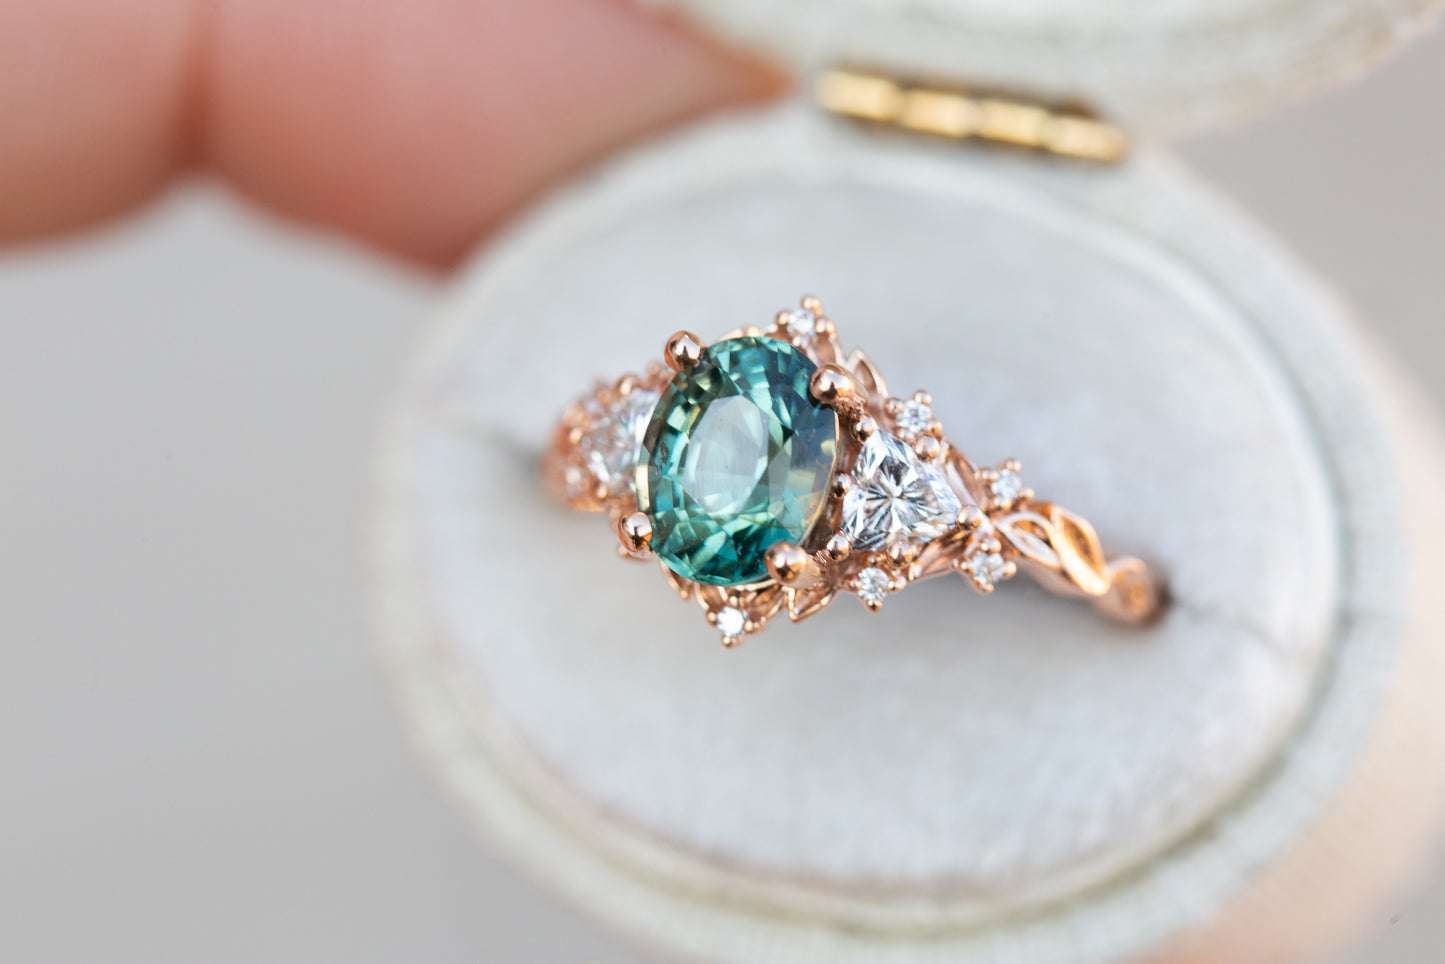 Briar rose three stone with 1.58ct green teal sapphire